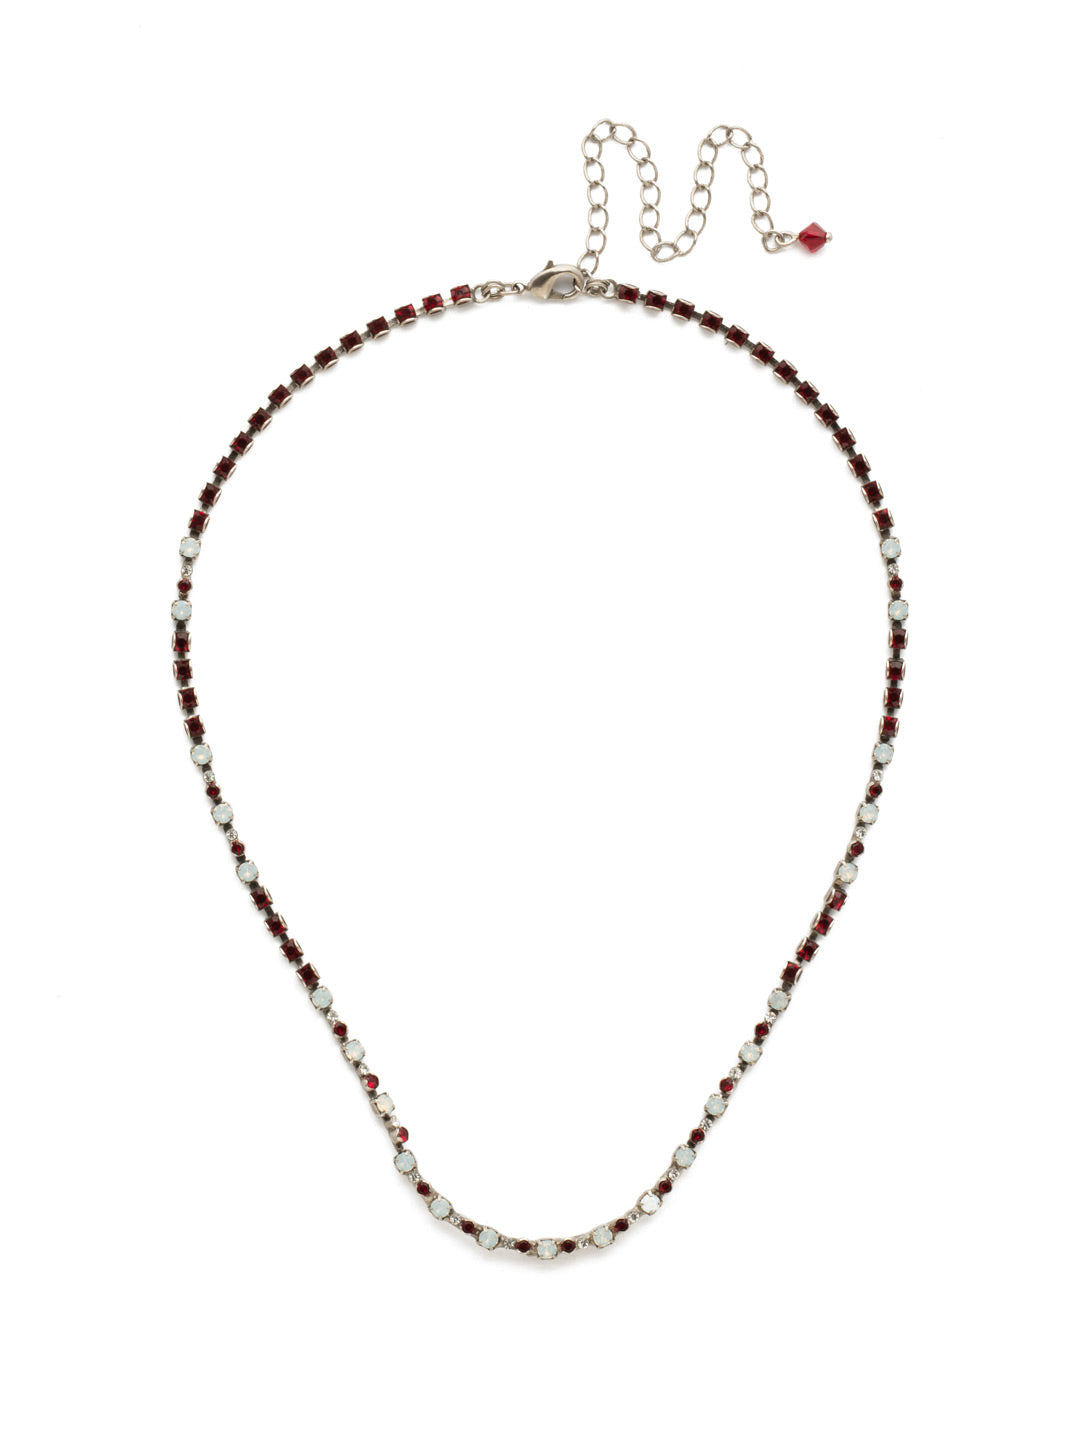 The Skinny Necklace - NDU45ASCP - Petite round crystals in a variety of settings align to form this sleek, slender style.